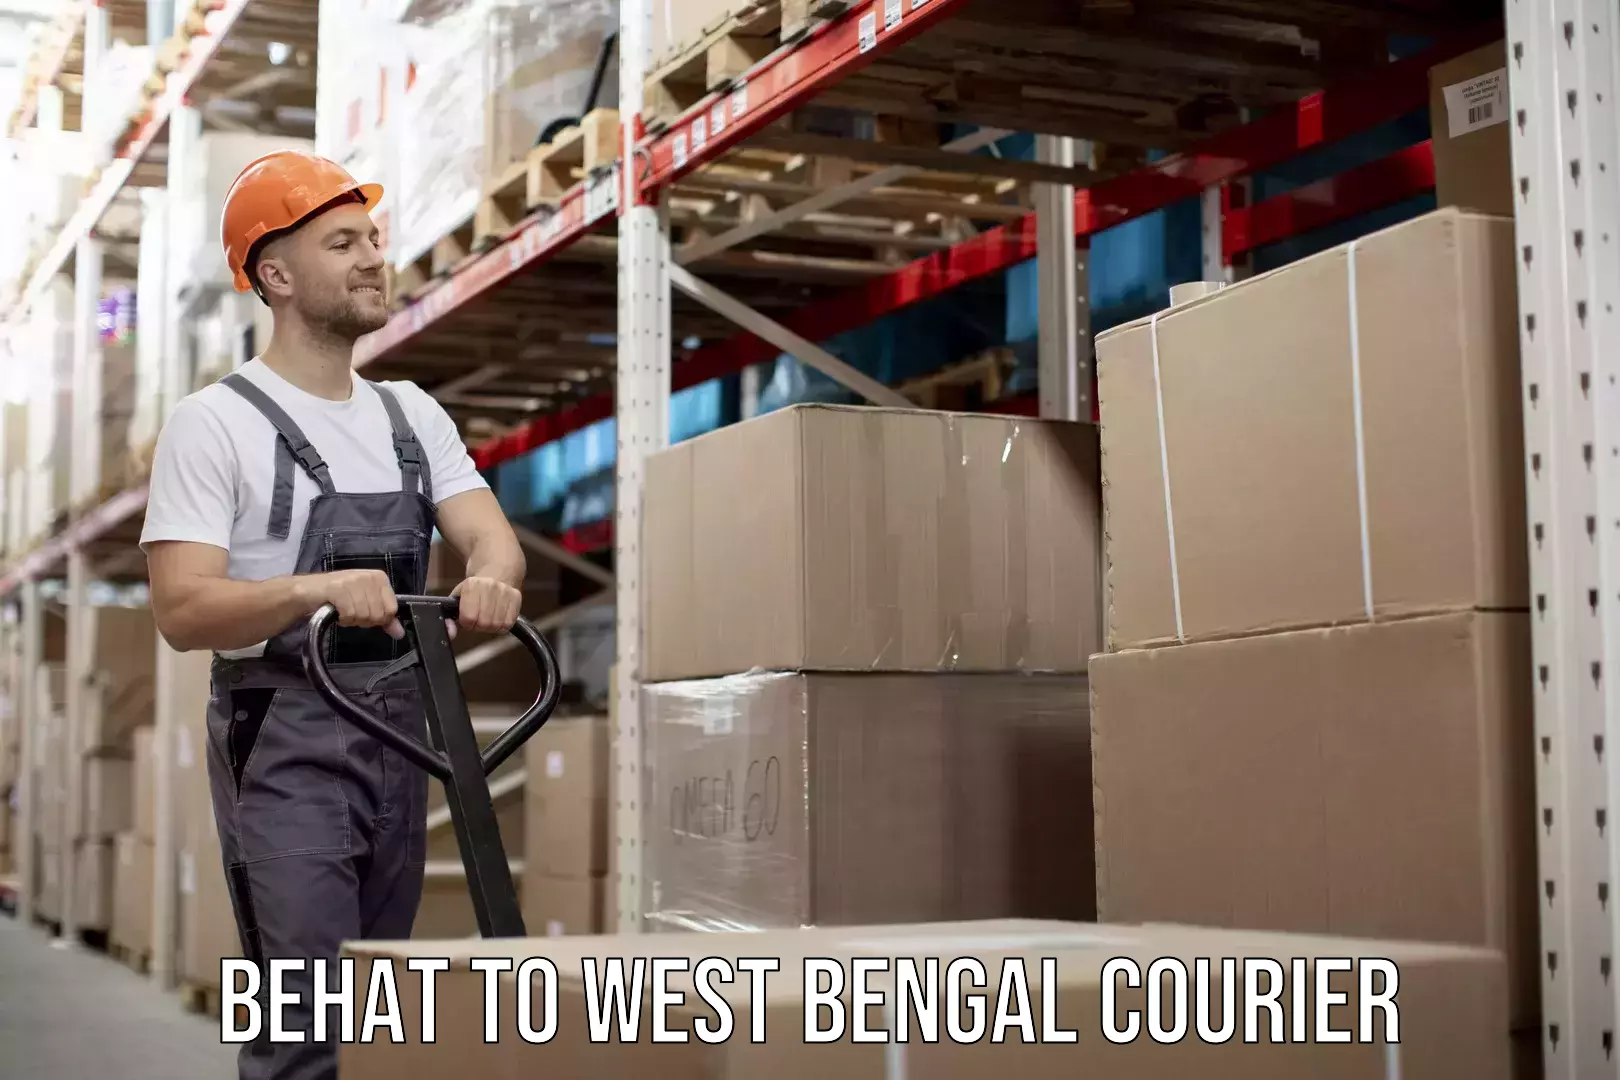 Sustainable delivery practices Behat to West Bengal